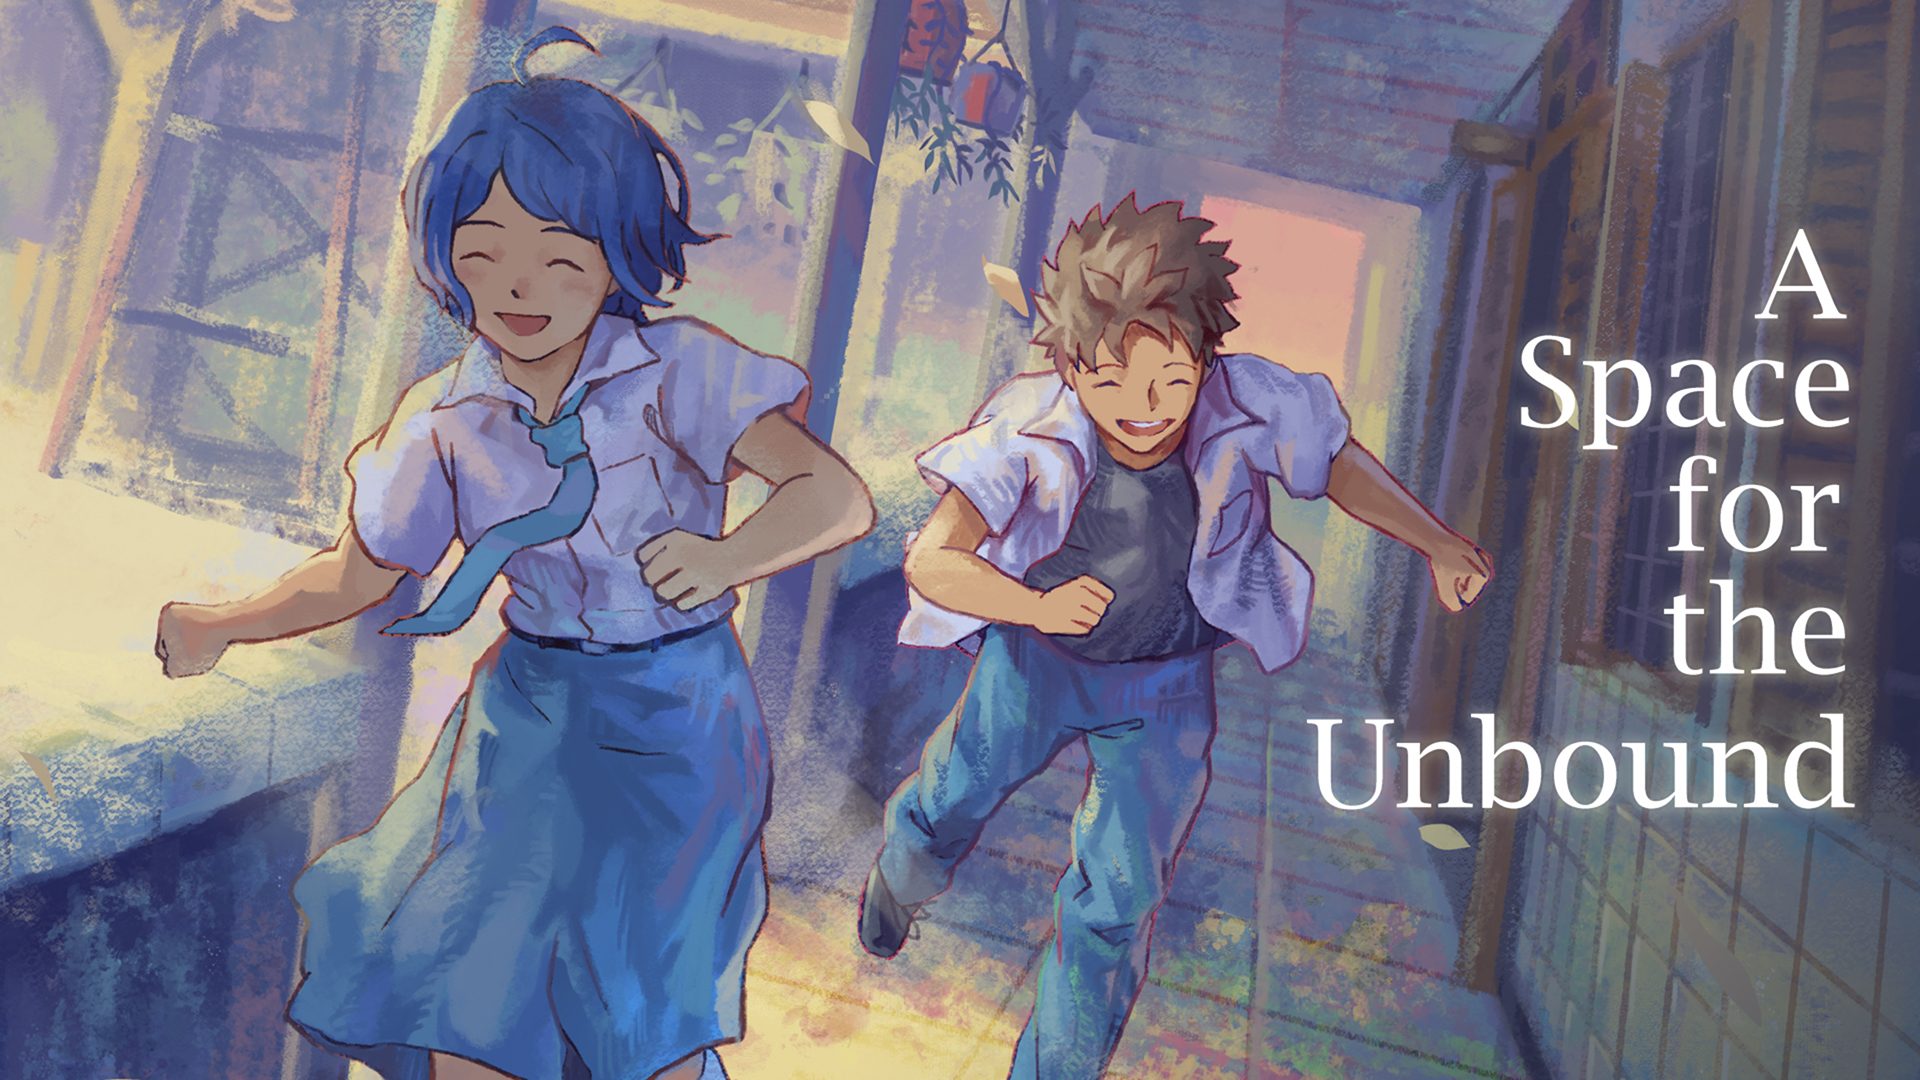 A Space for the Unbound 心に咲く花』プレイレビュー！ 終末が迫る 